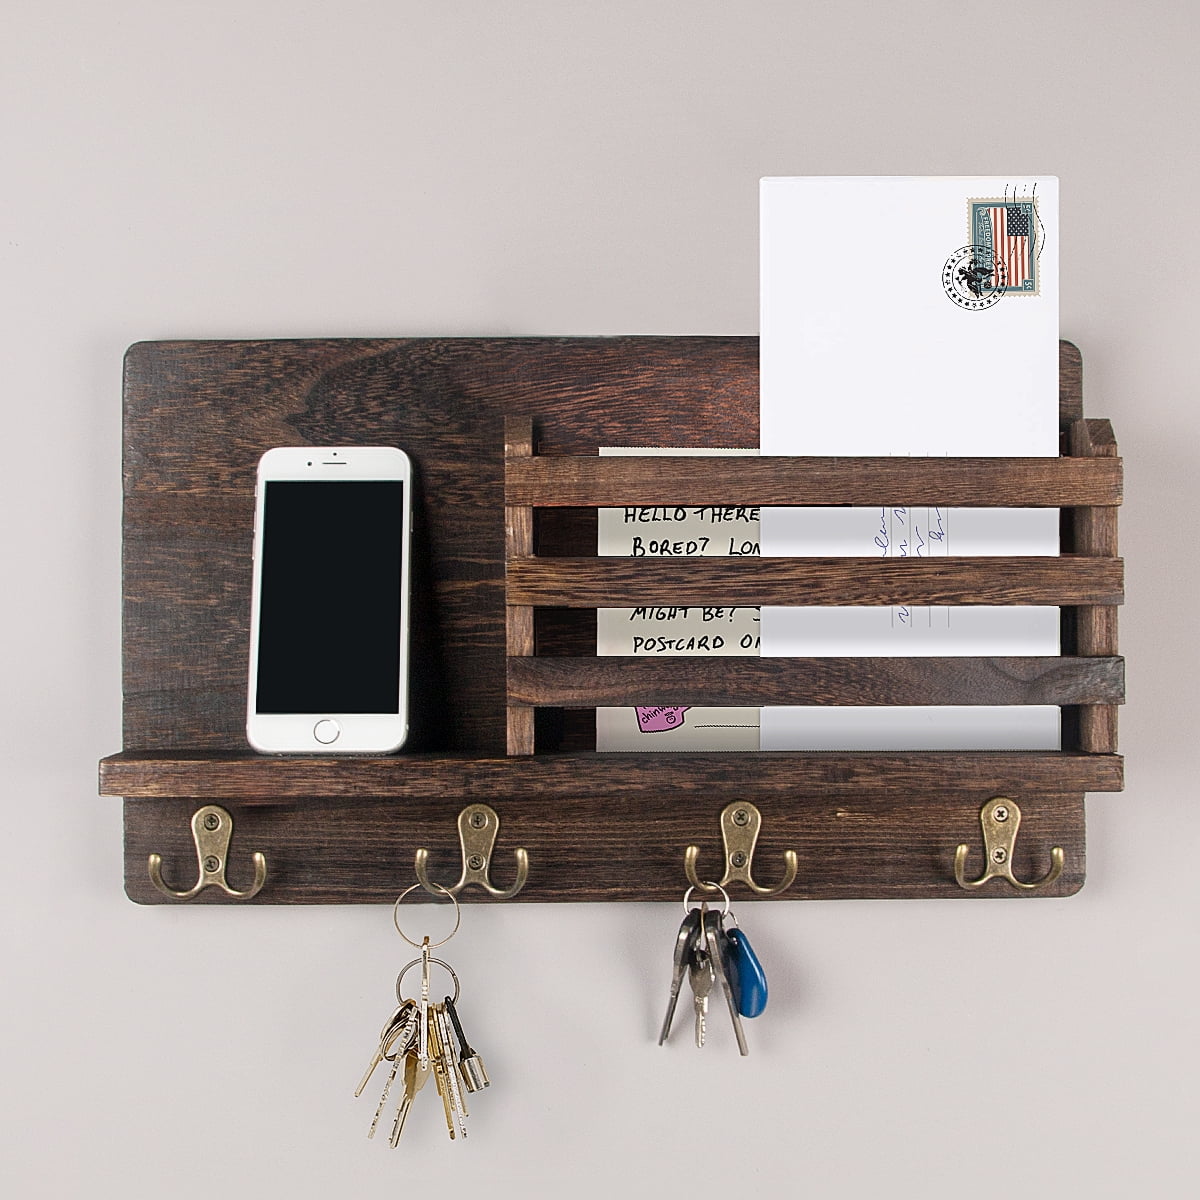 Key Holder for Wall White Letter Mail Holder Rack Key Hooks with Chalkboard Decorative Wood Entryway Organizer for Organized House Office Hallway Entryway